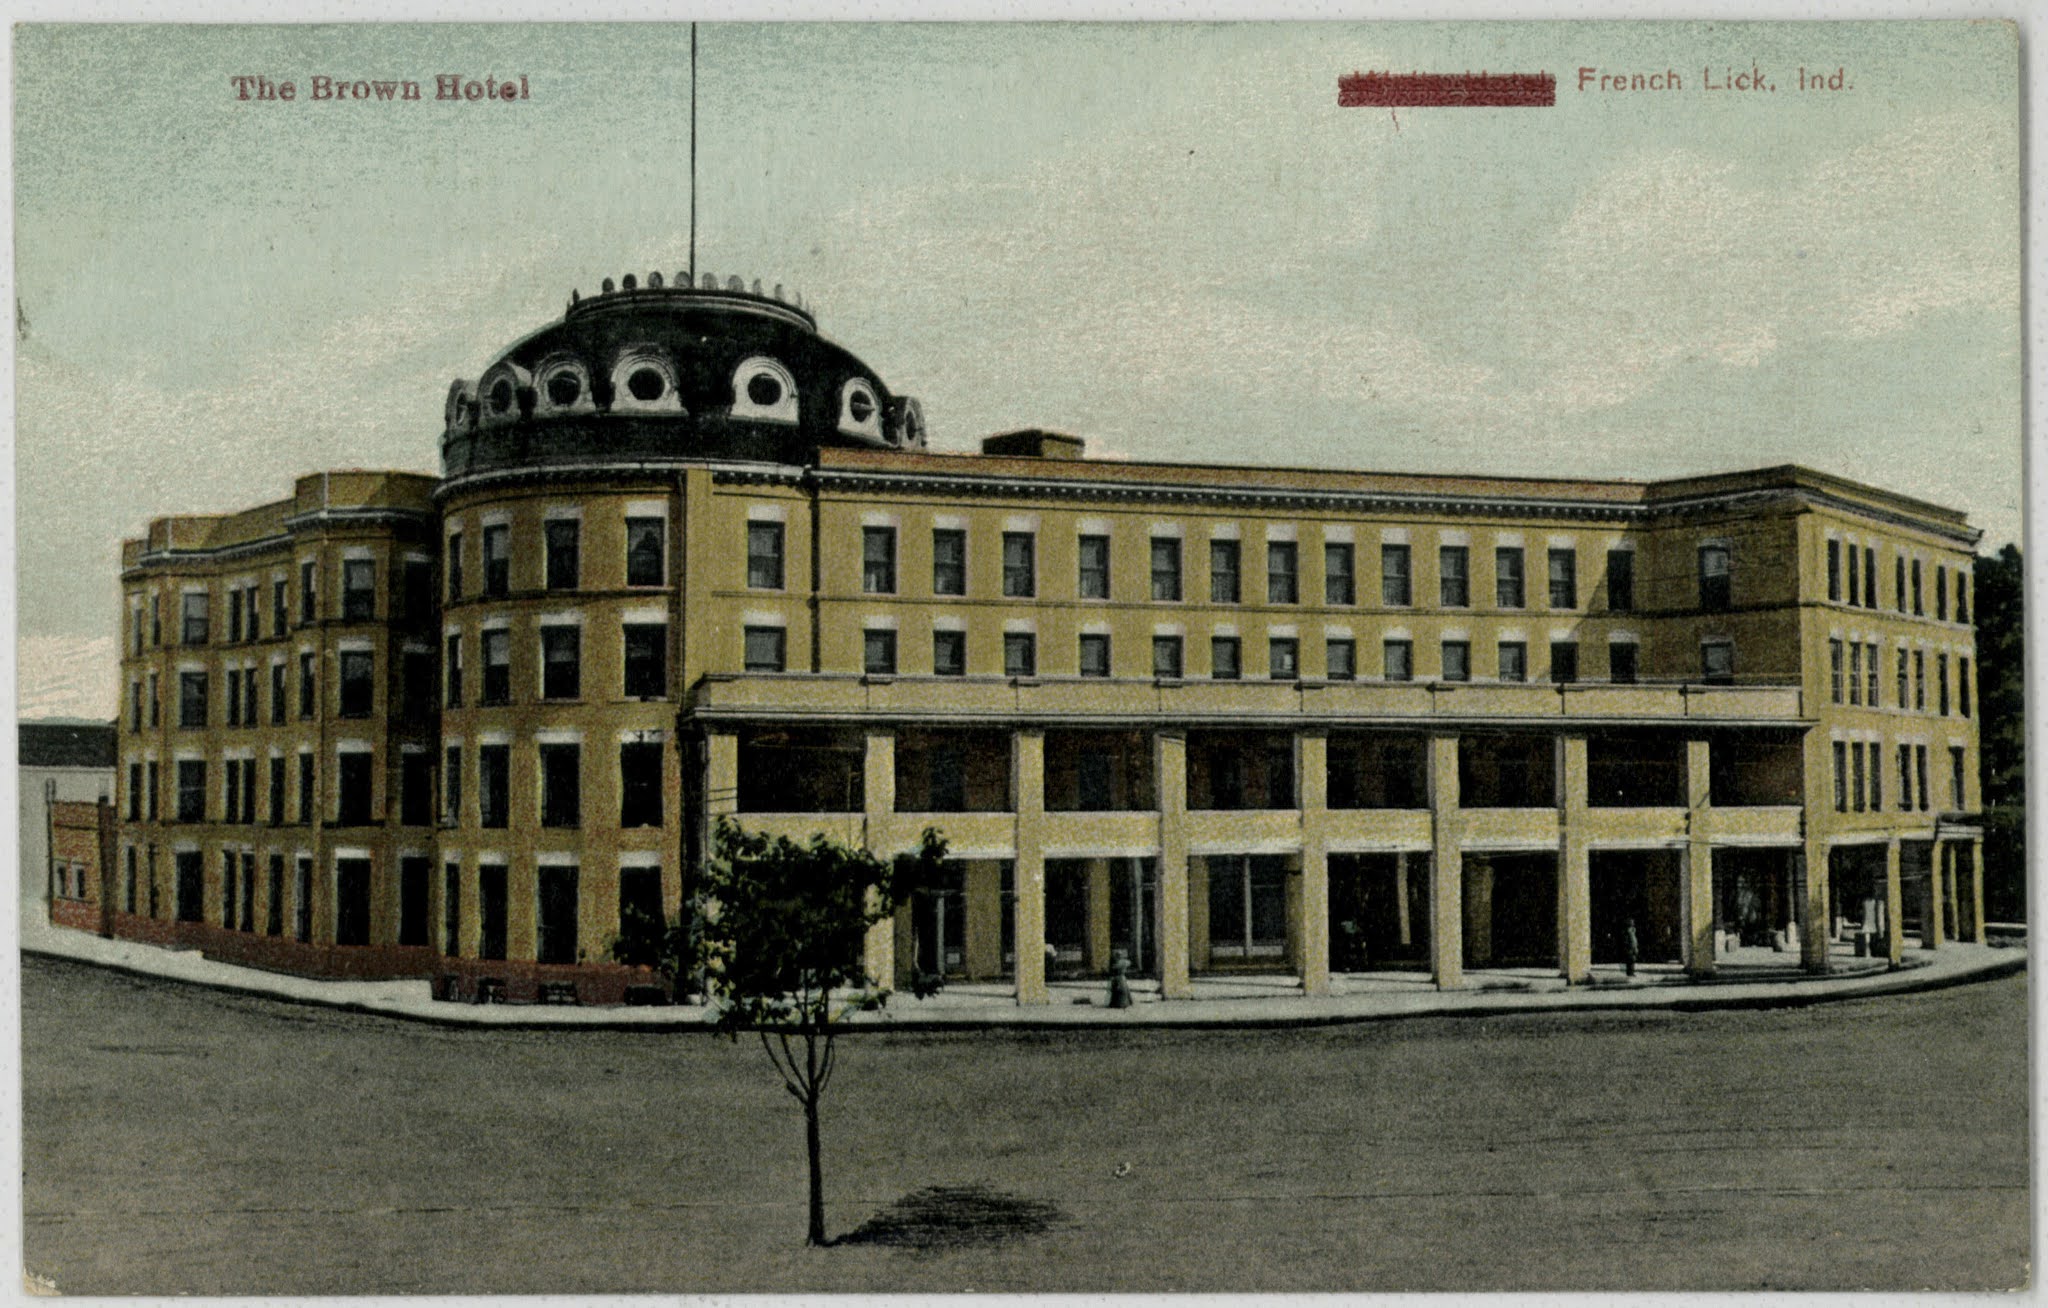 The Brown Hotel Post Card